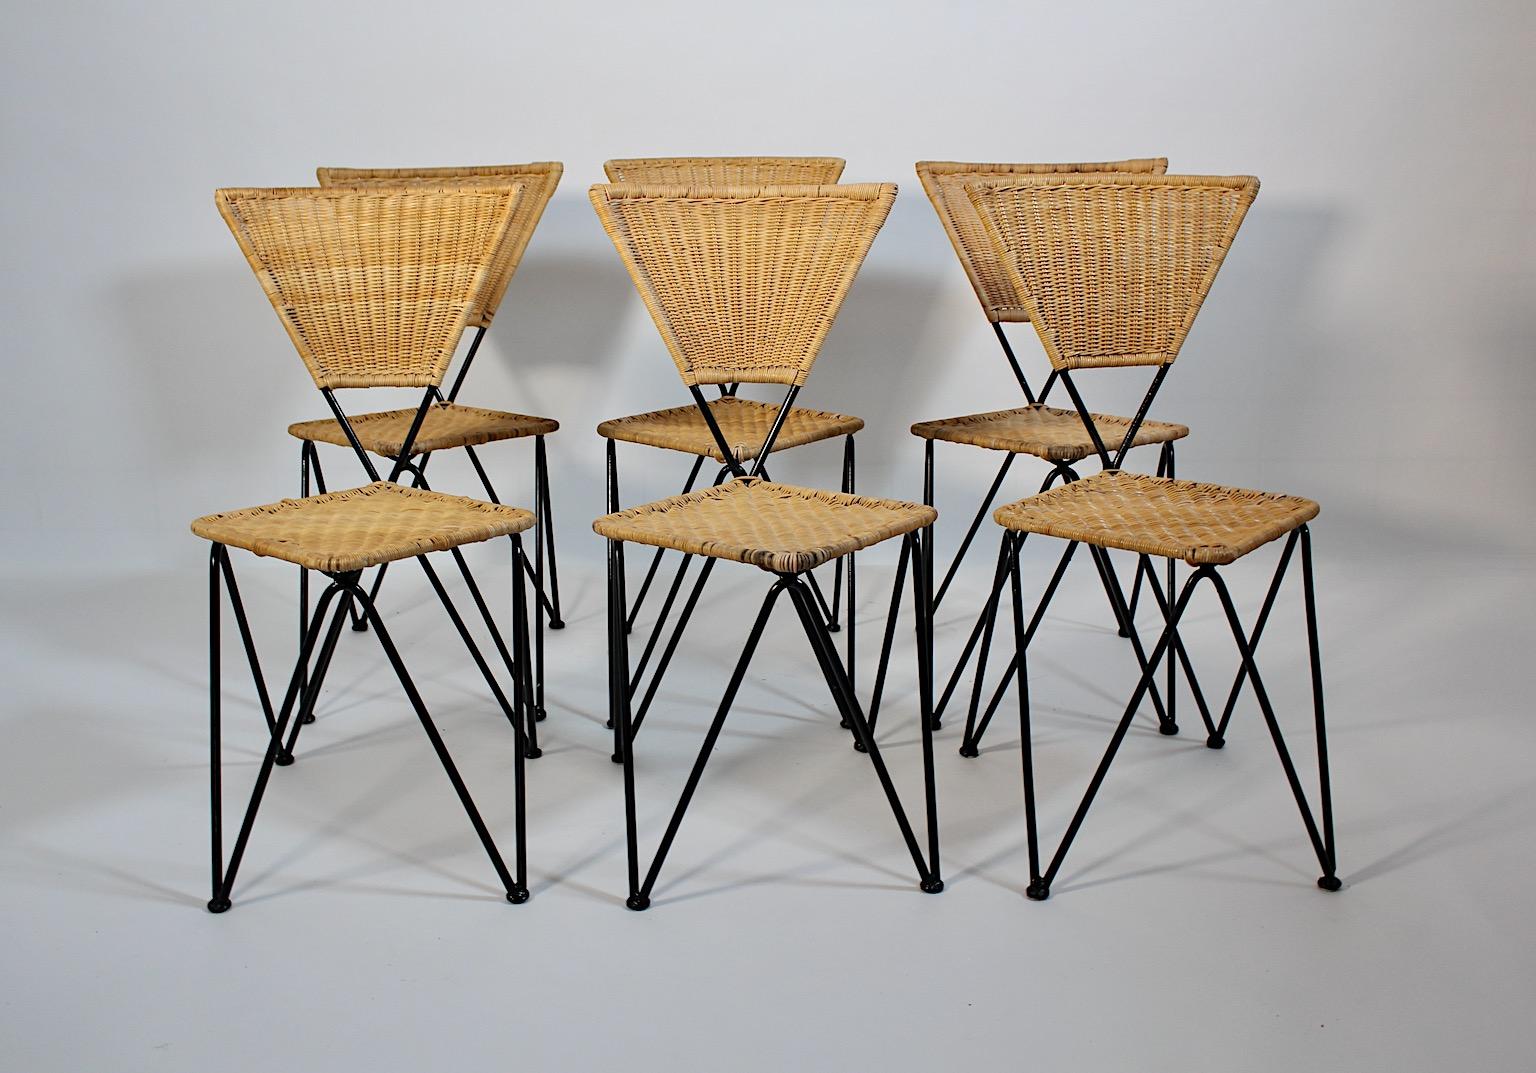 Mid Century Modern organic vintage six dining chairs from rattan and 
black metal by Sonett 1950s Vienna.
A charming set of six dining chairs or chairs triangle shape from woven rattan for seat and back and black lacquered metal frame pin